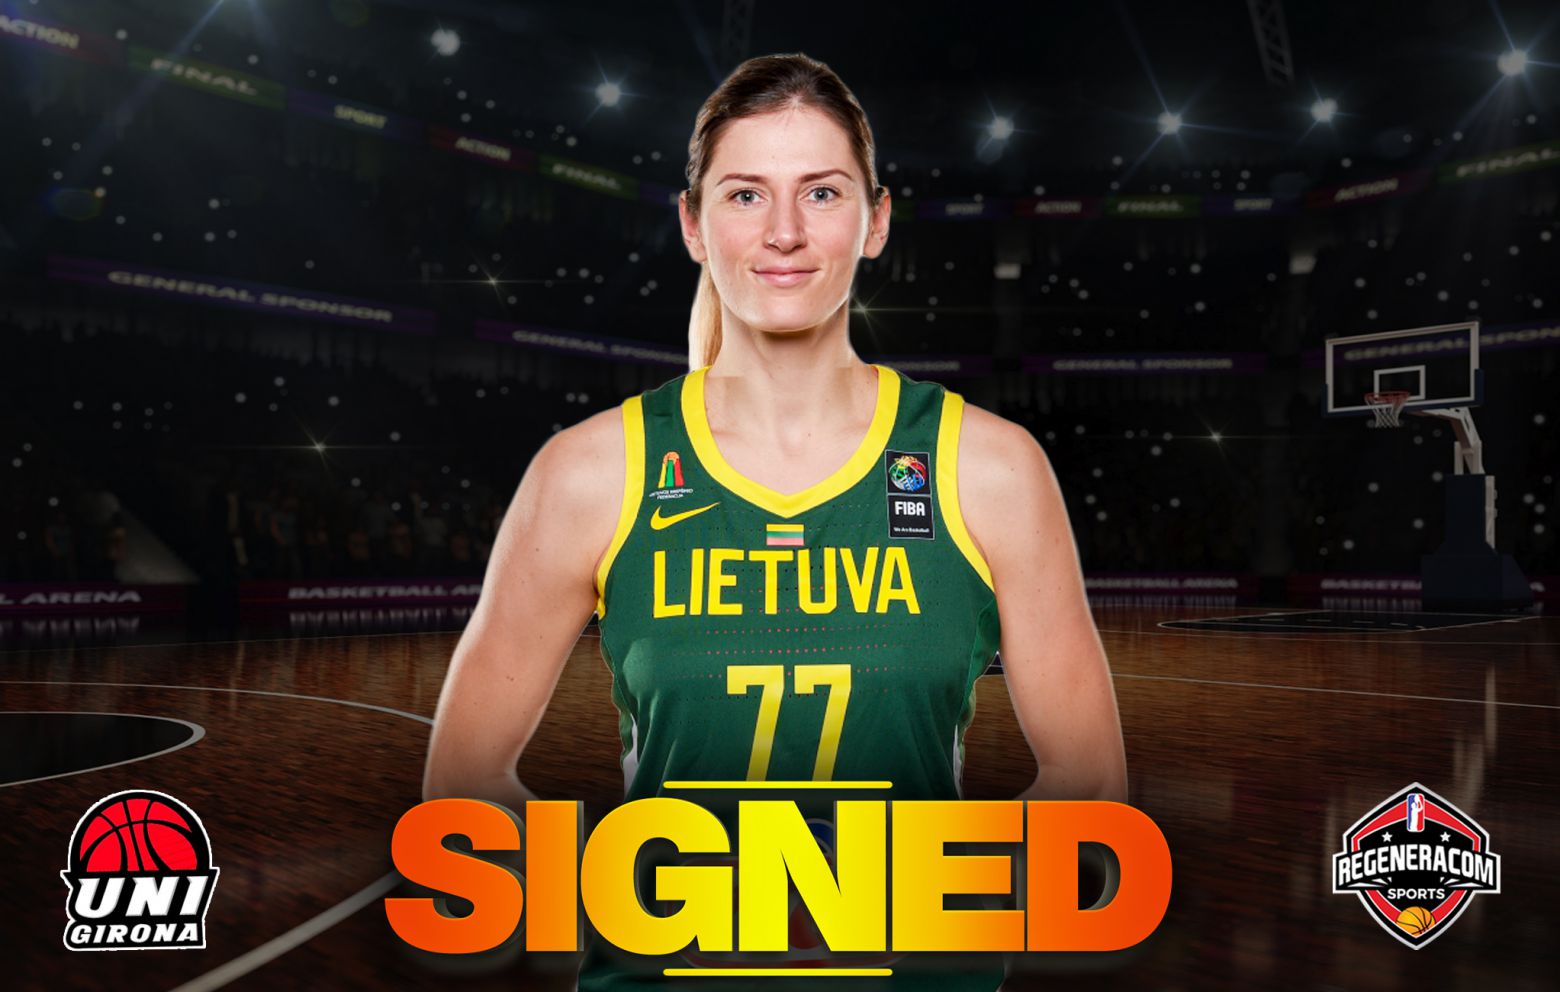 GIEDRE LABUCKIENE has extended with Uni Girona for the 2021/22 and 2022/23 seasons